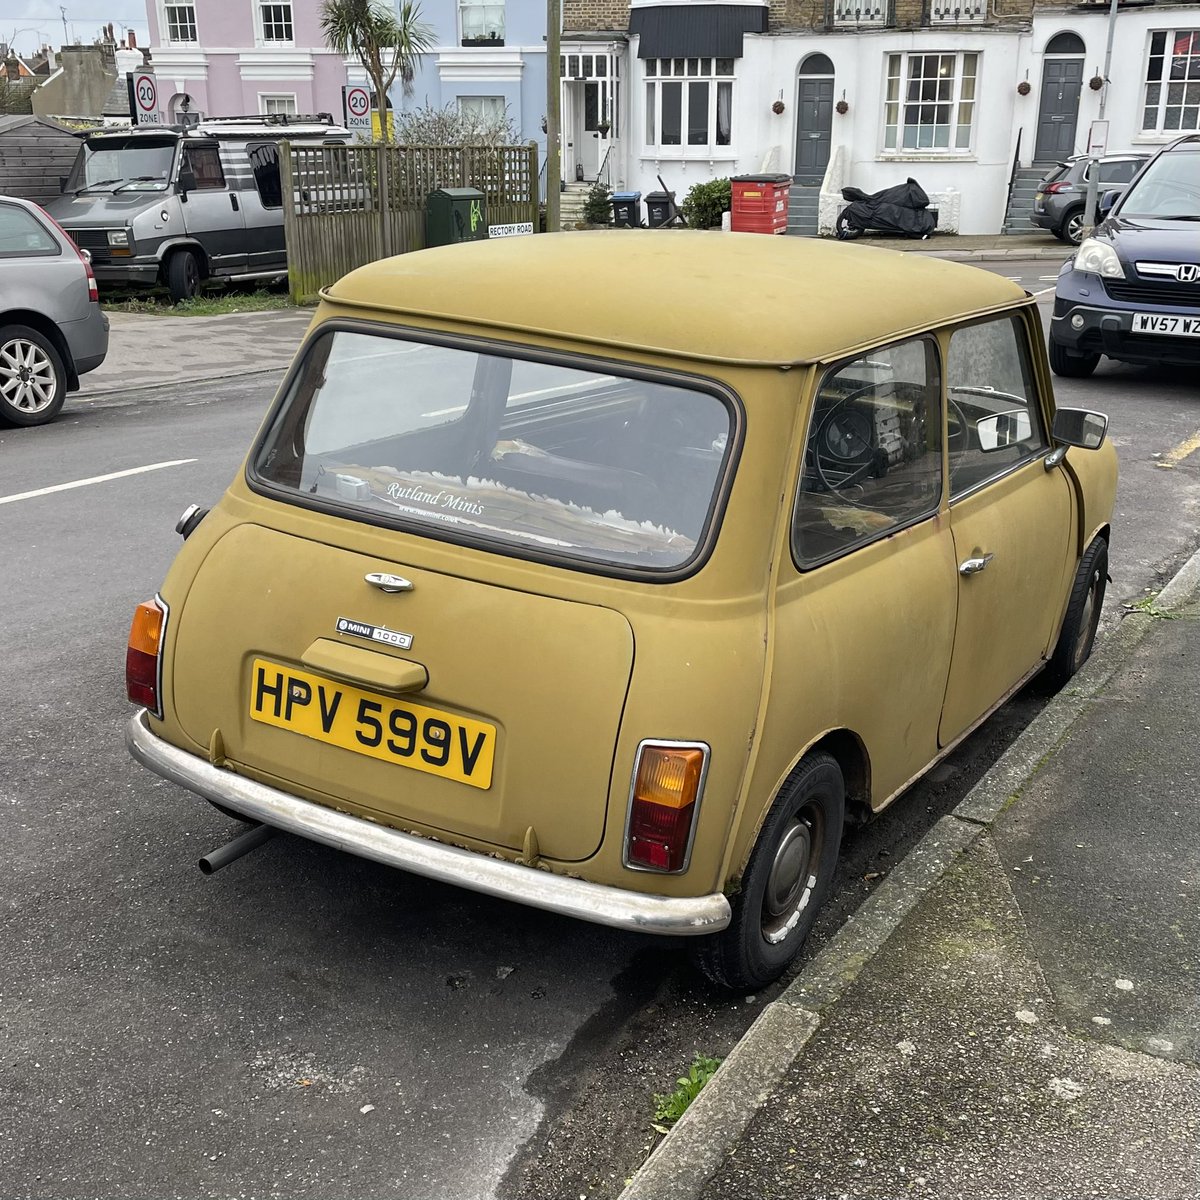 Spotted this little beauty last weekend. A bit ratty on the outside but I believe it may be a daily driver. Top marks!